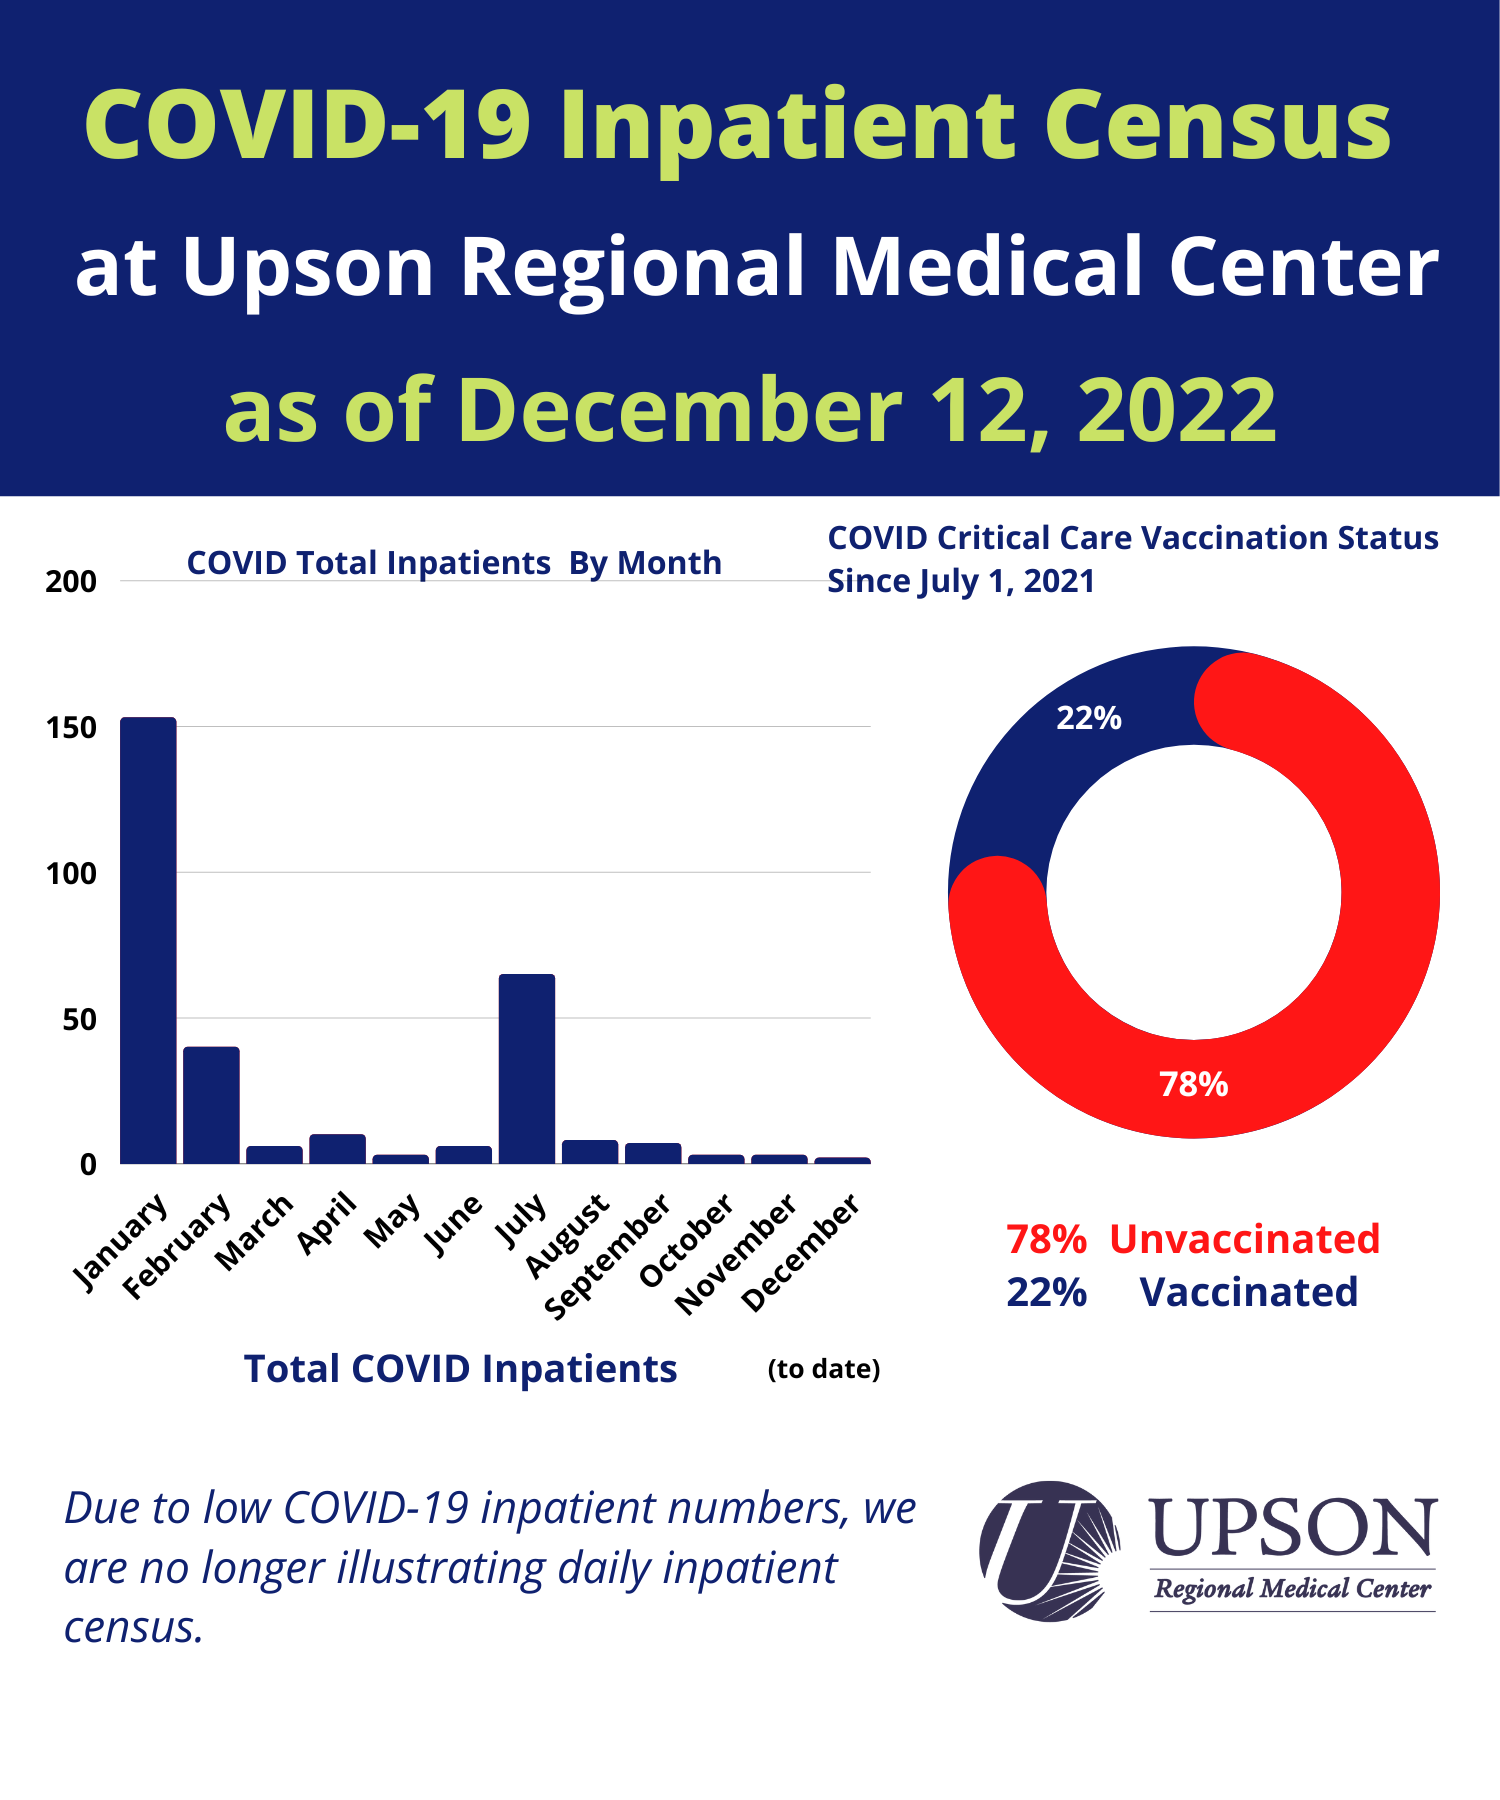 Photo for URMC COVID-19 inpatient status as of December 12, 2022.